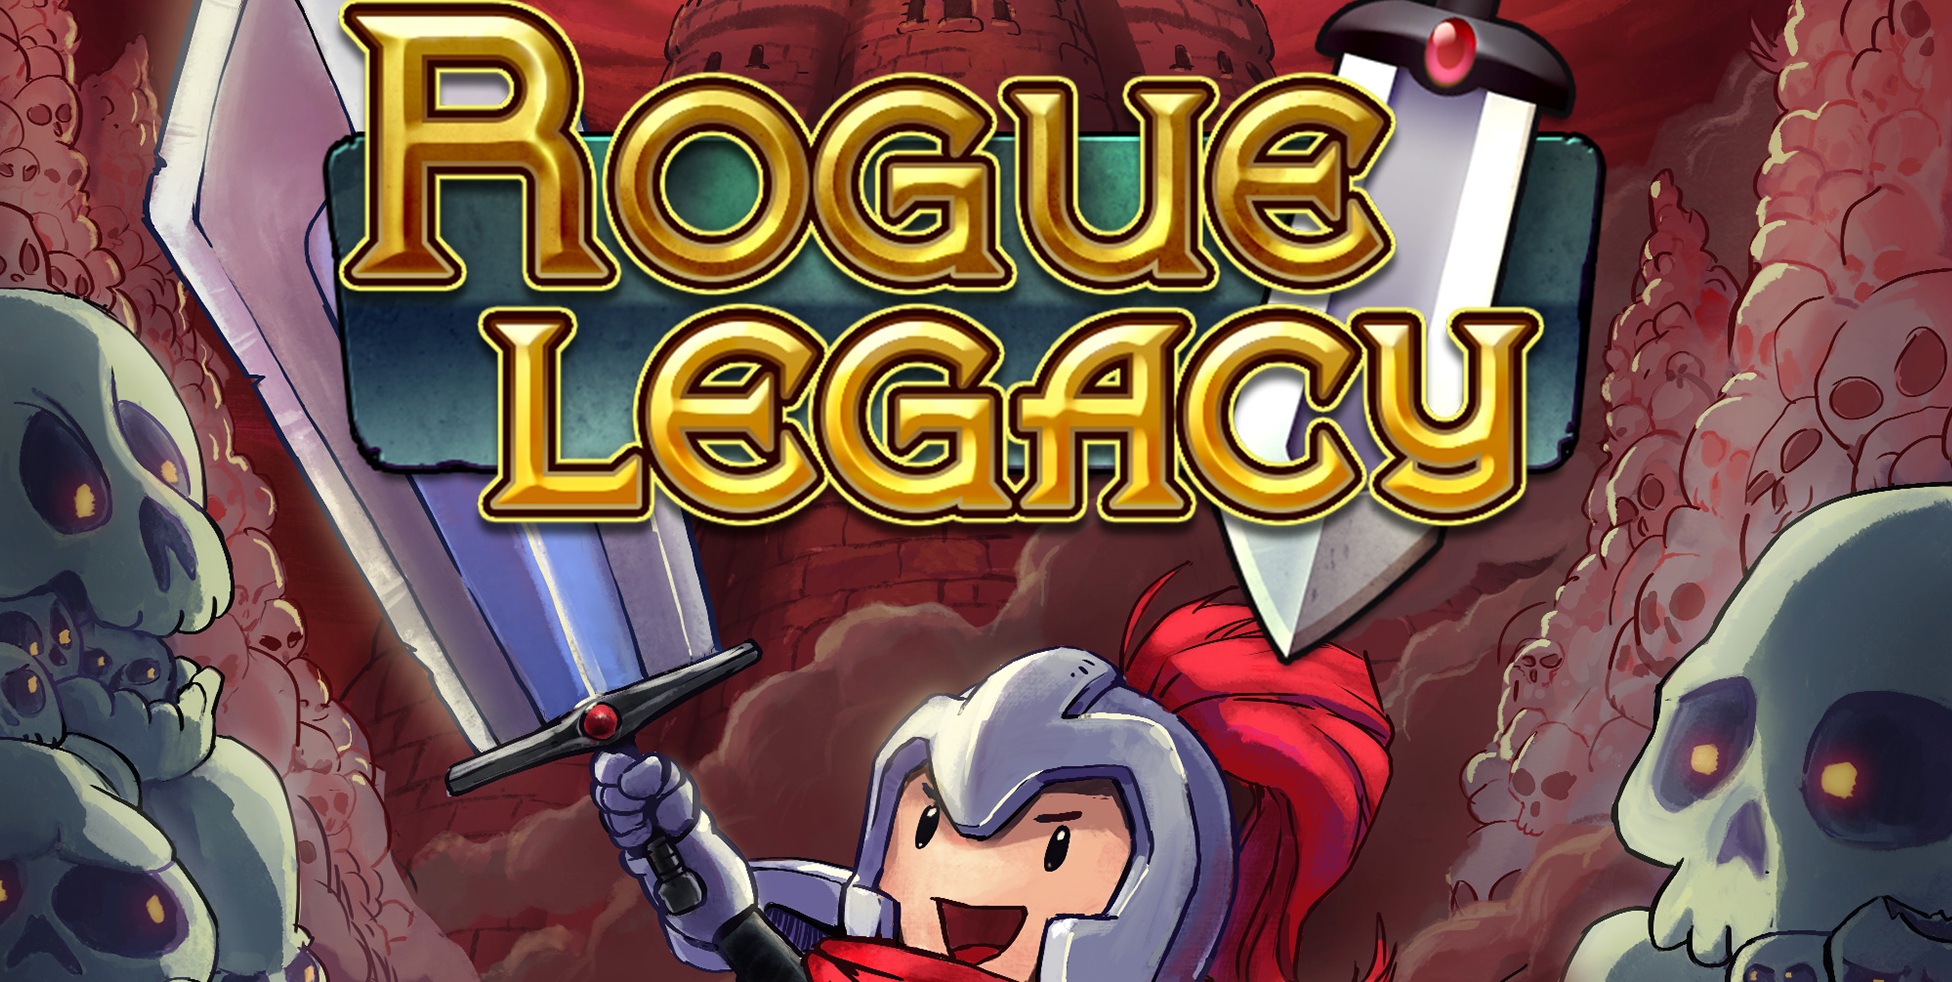 instal the new for mac Rogue Legacy 2